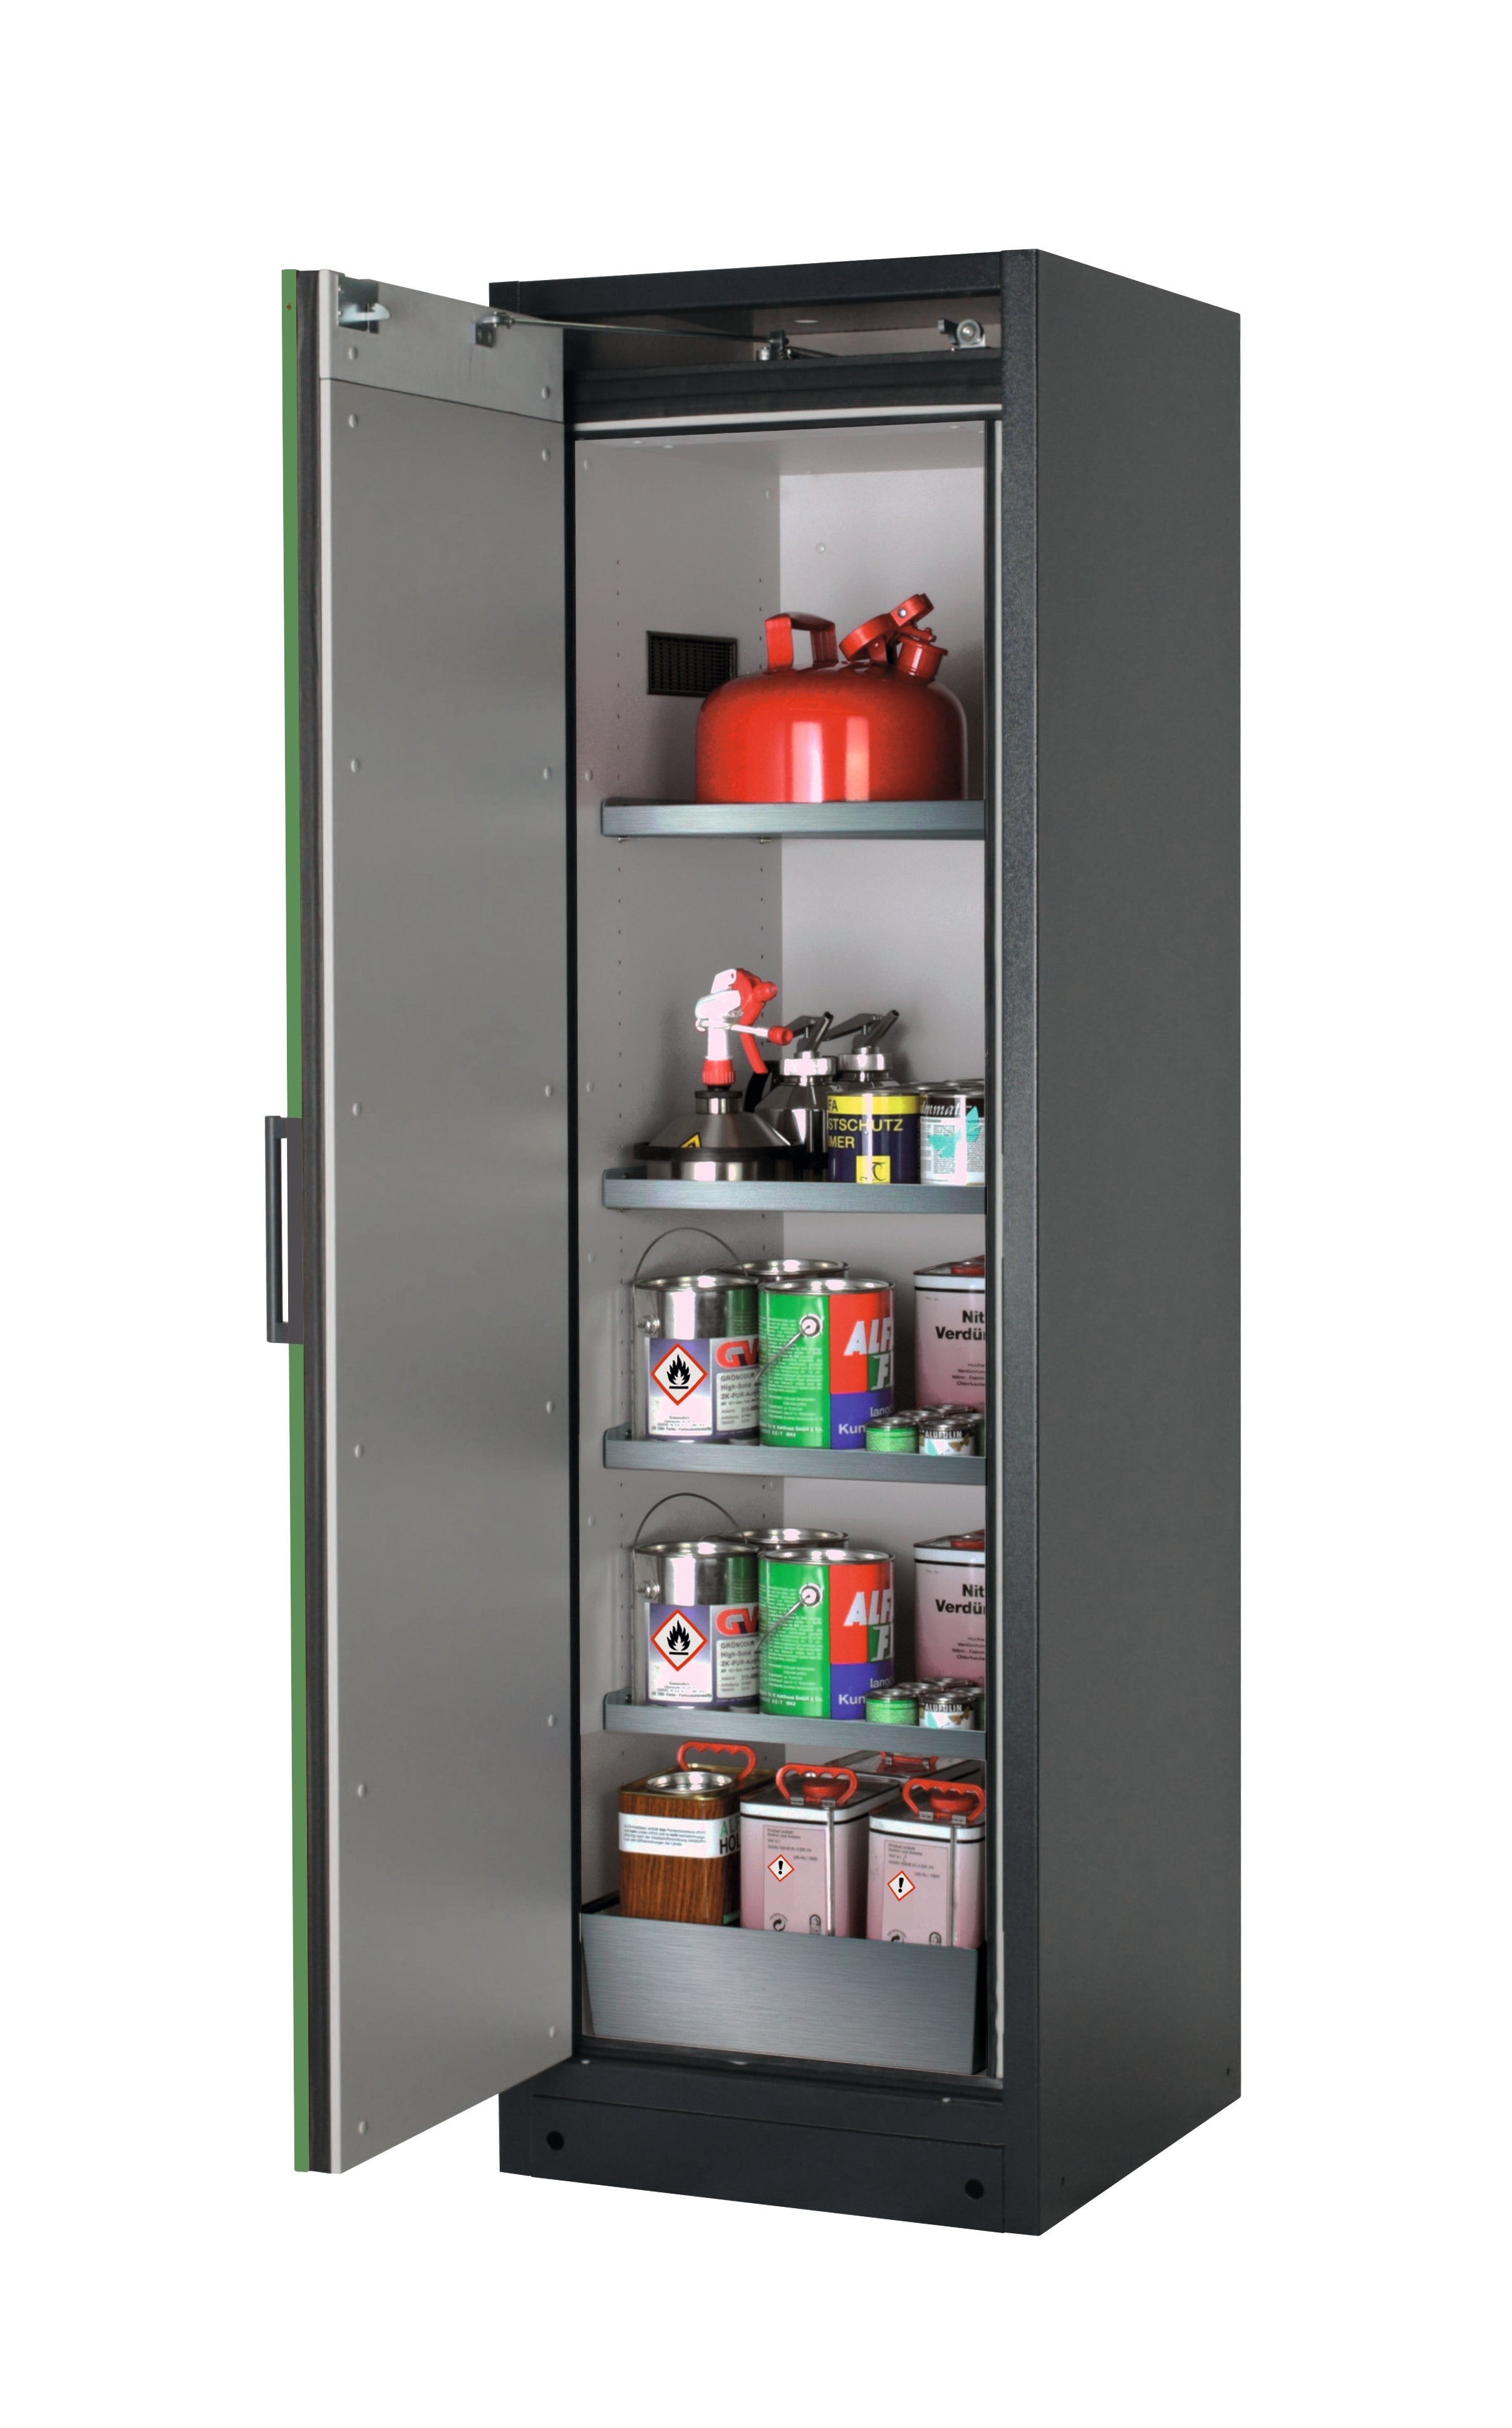 Type 90 safety storage cabinet Q-PEGASUS-90 model Q90.195.060.WDAC in reseda green RAL 6011 with 4x shelf standard (stainless steel 1.4301),